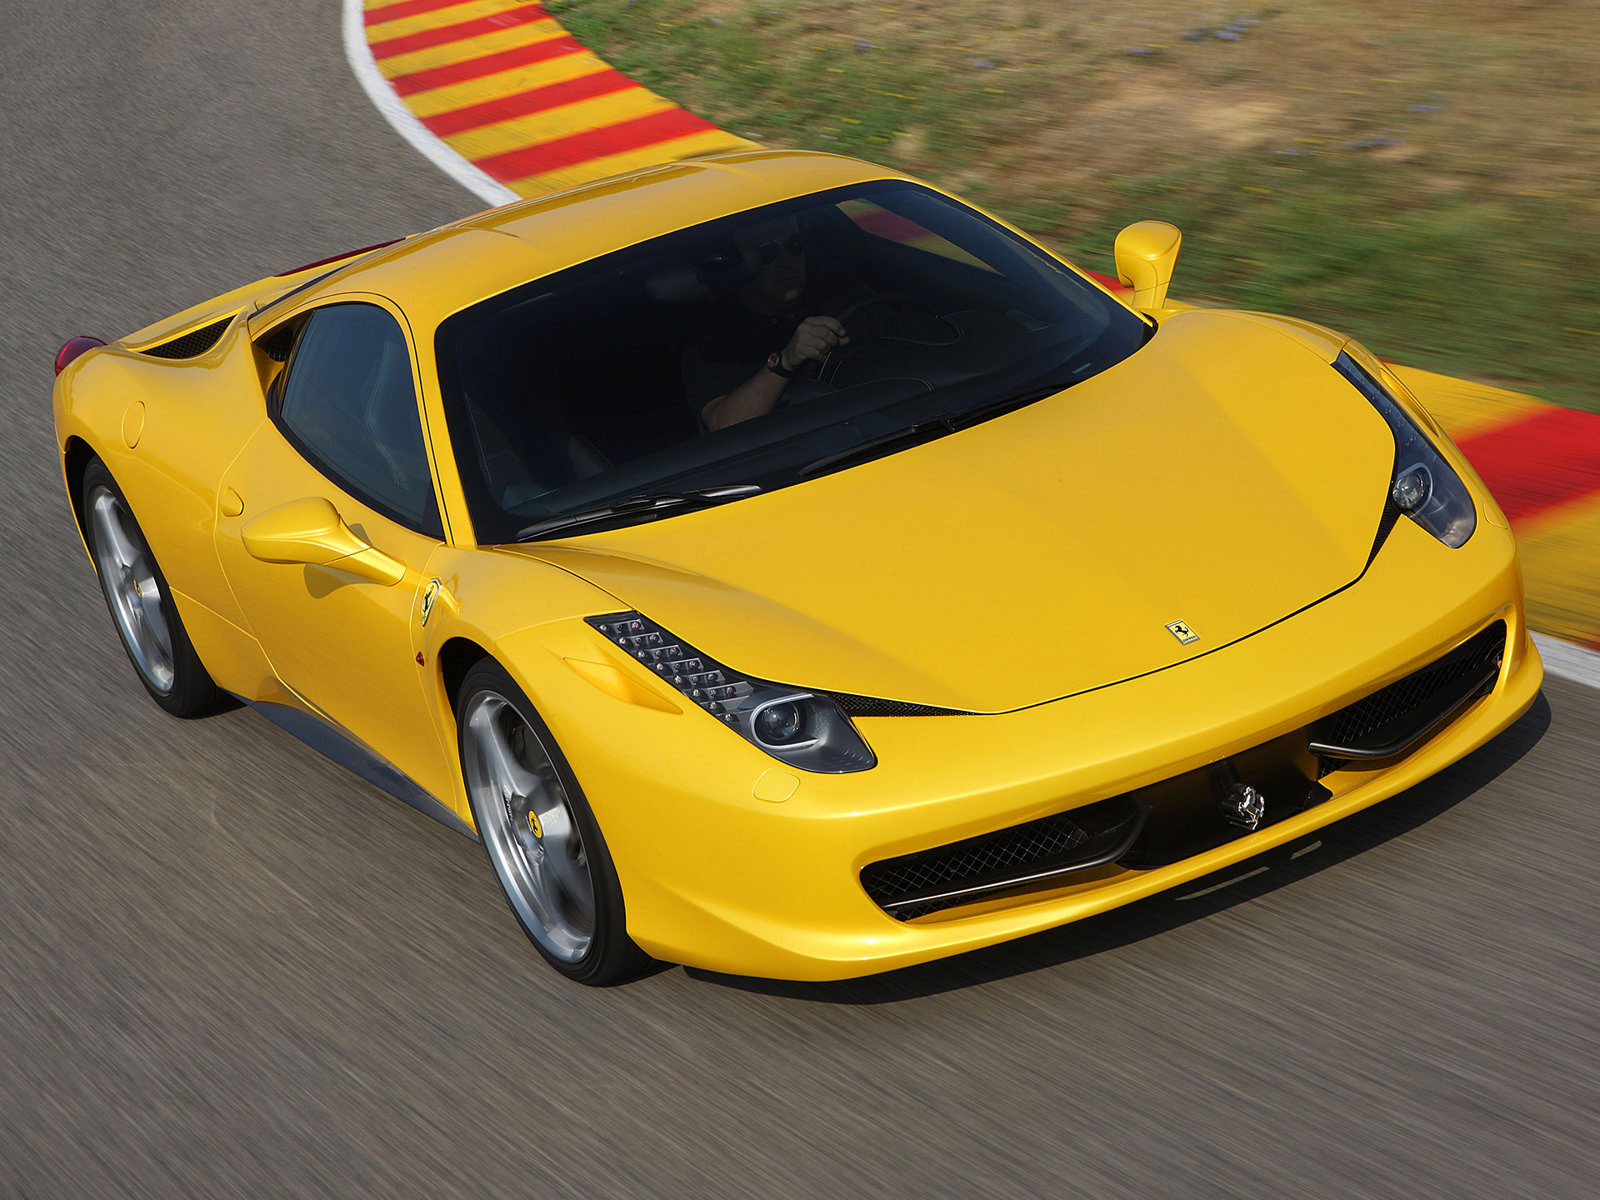 Ferrari Ferrari 458 Italia Ferrari 458 Italia photo car wallpapers 1600x1200